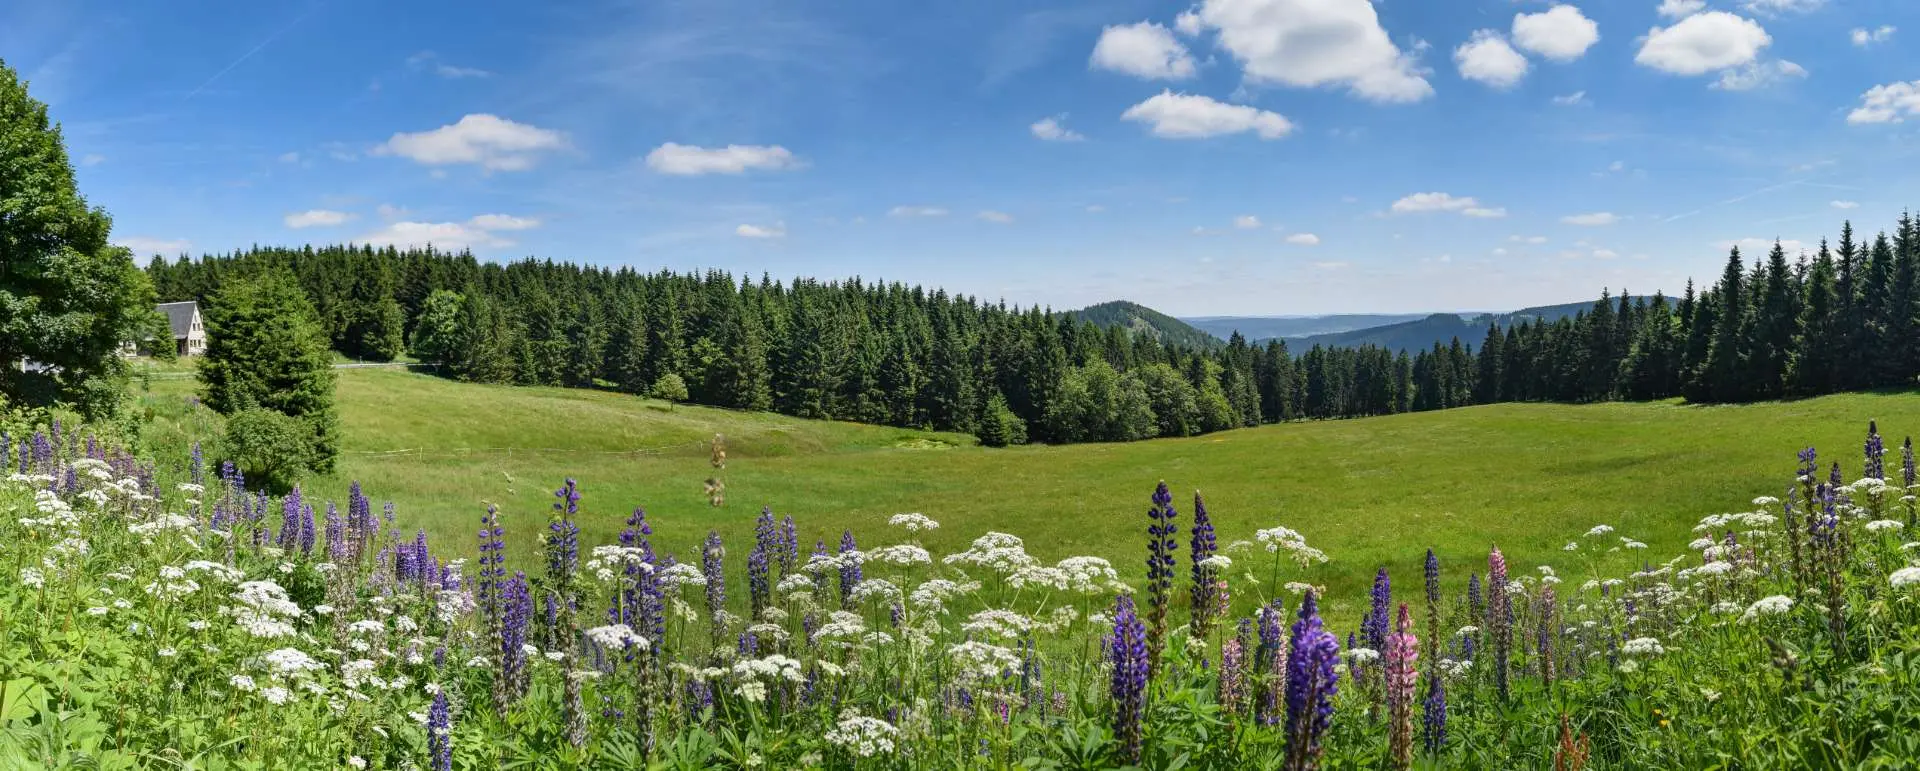 Thuringian Forest - the destination for company trips